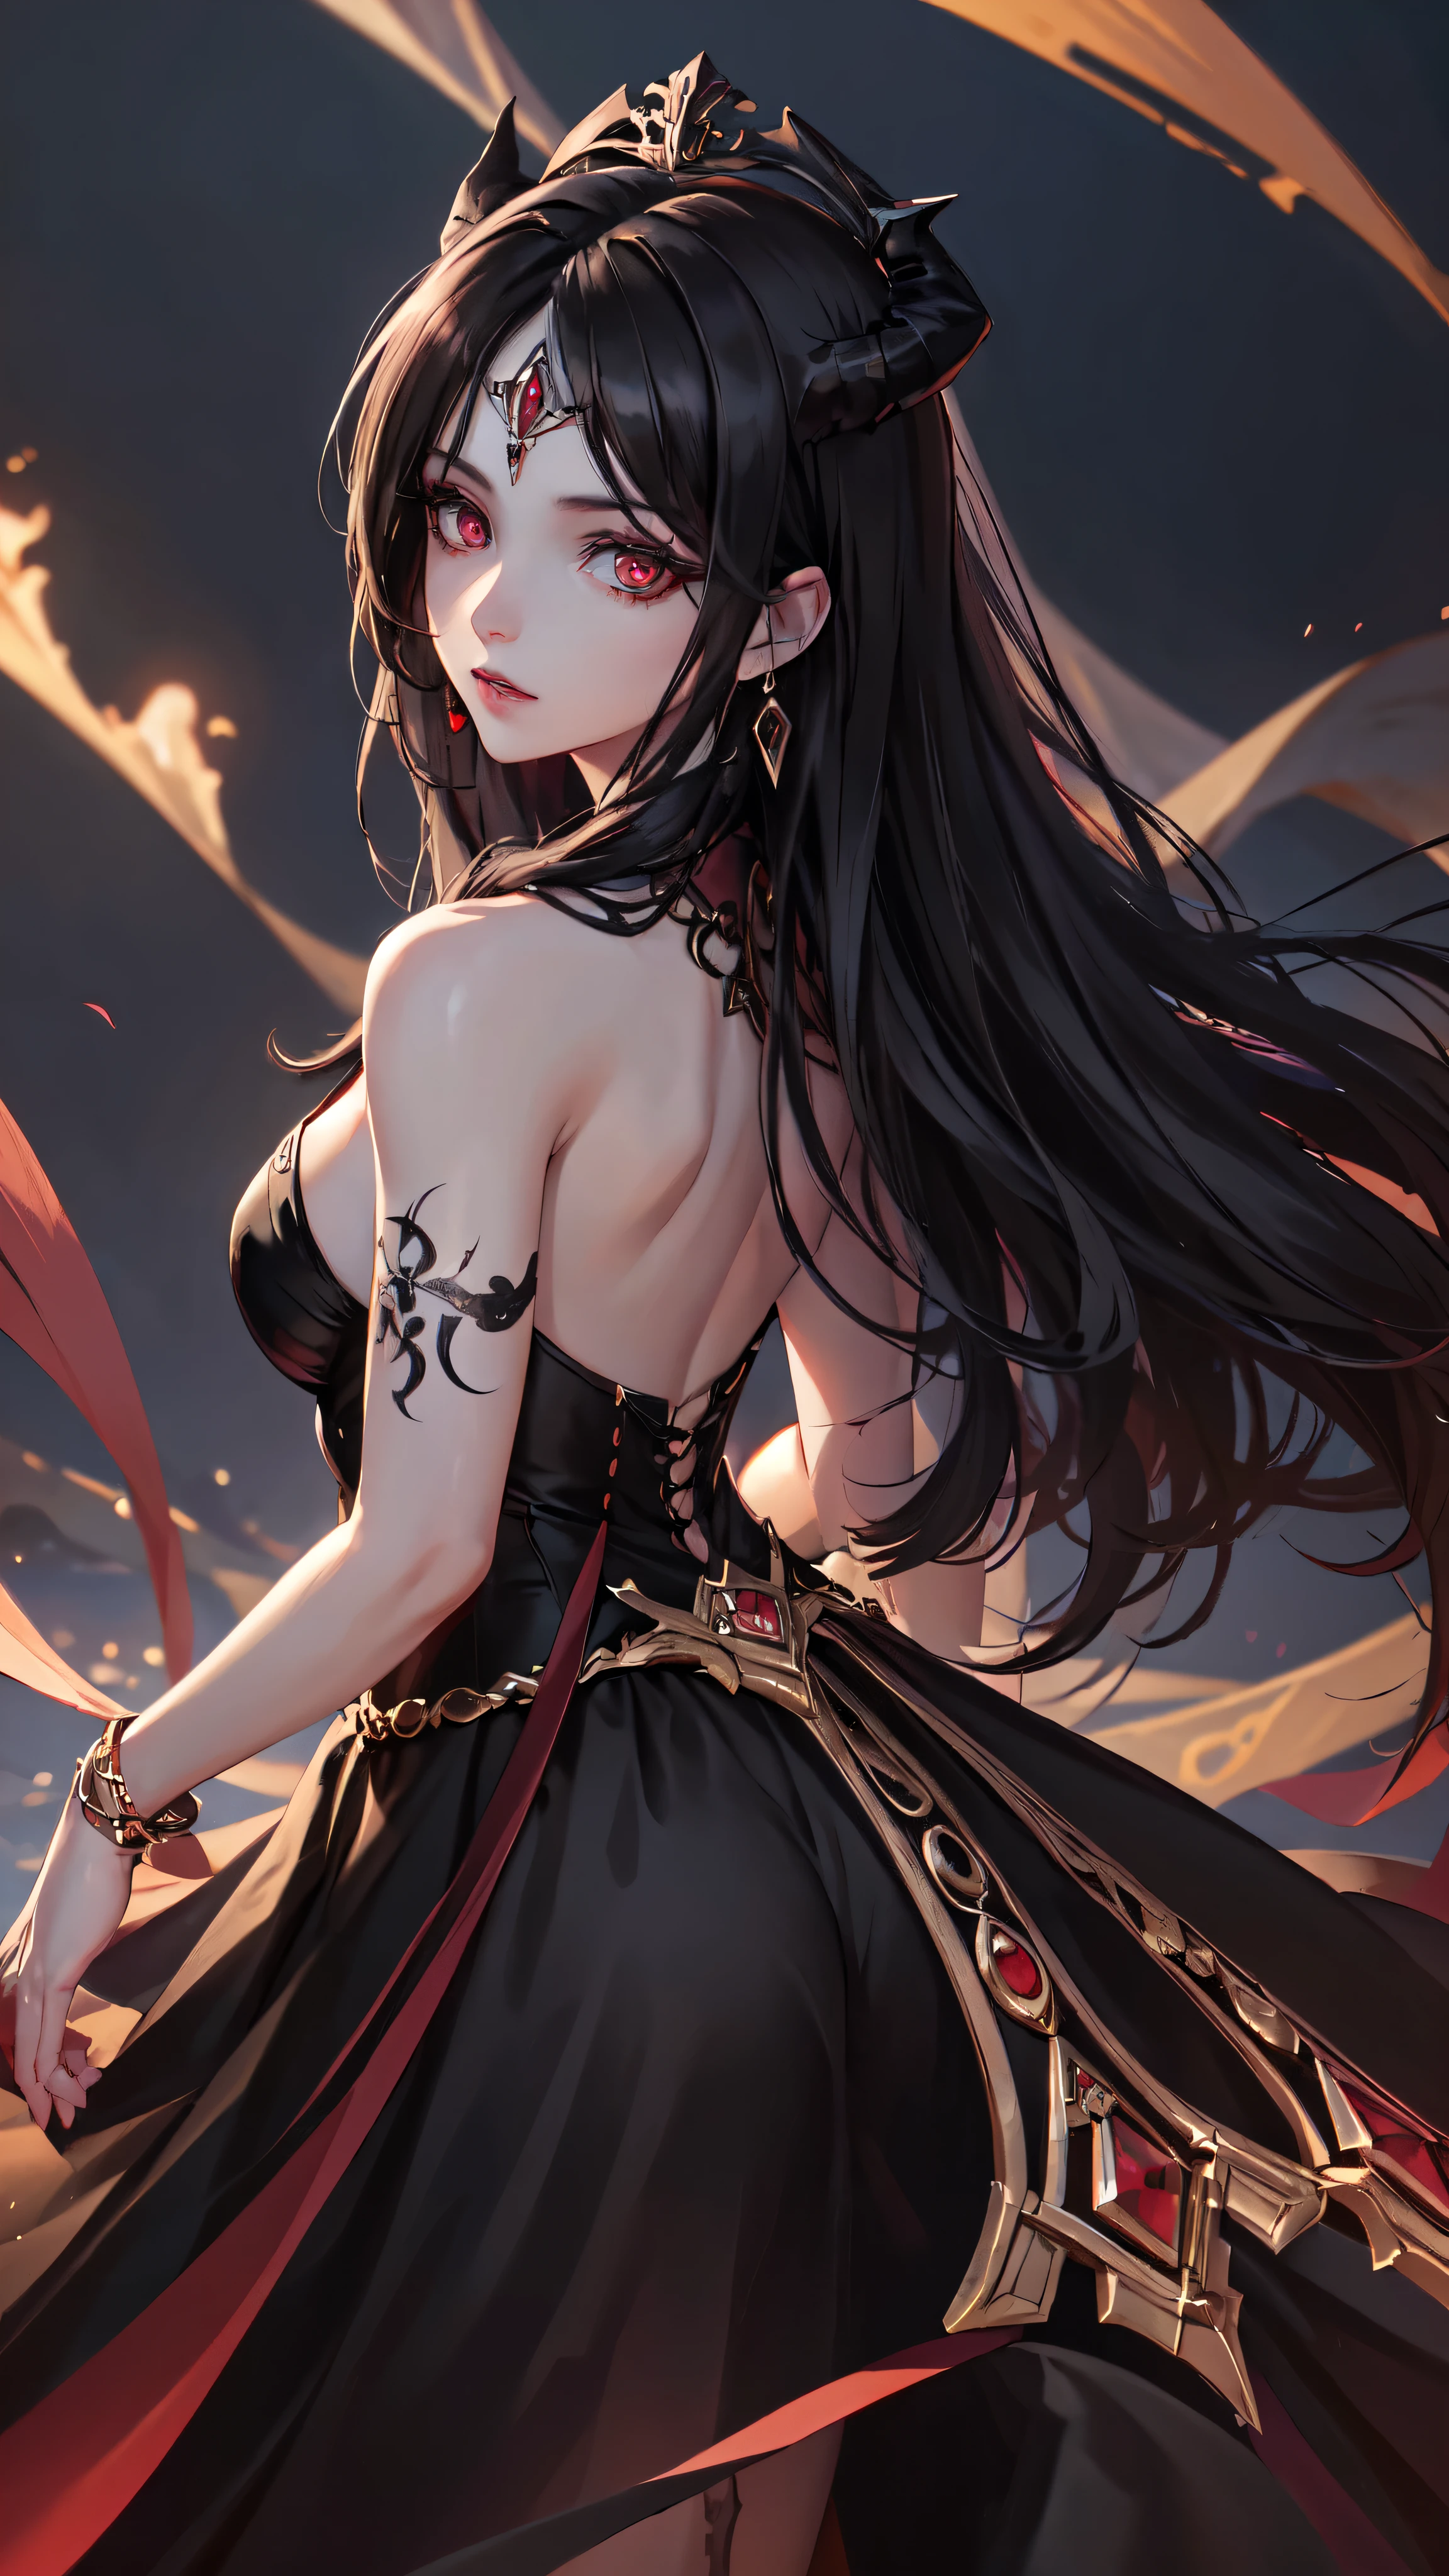 (high quality,best quality,masterpiece:1.2),1 girl,beautiful and delicate eyes,Beautiful and delicate lips,Extremely detailed eyes and face,long eyelashes,black hair,red eyes,earrings,view from behind,Show back,skirt,Blood,dark atmosphere,gothic style,pale skin,color tattoo,Crow crows,Unforgettable background music,mysterious lights,soft focus,bright colors, detailed face, detailed hands, detailed eyes